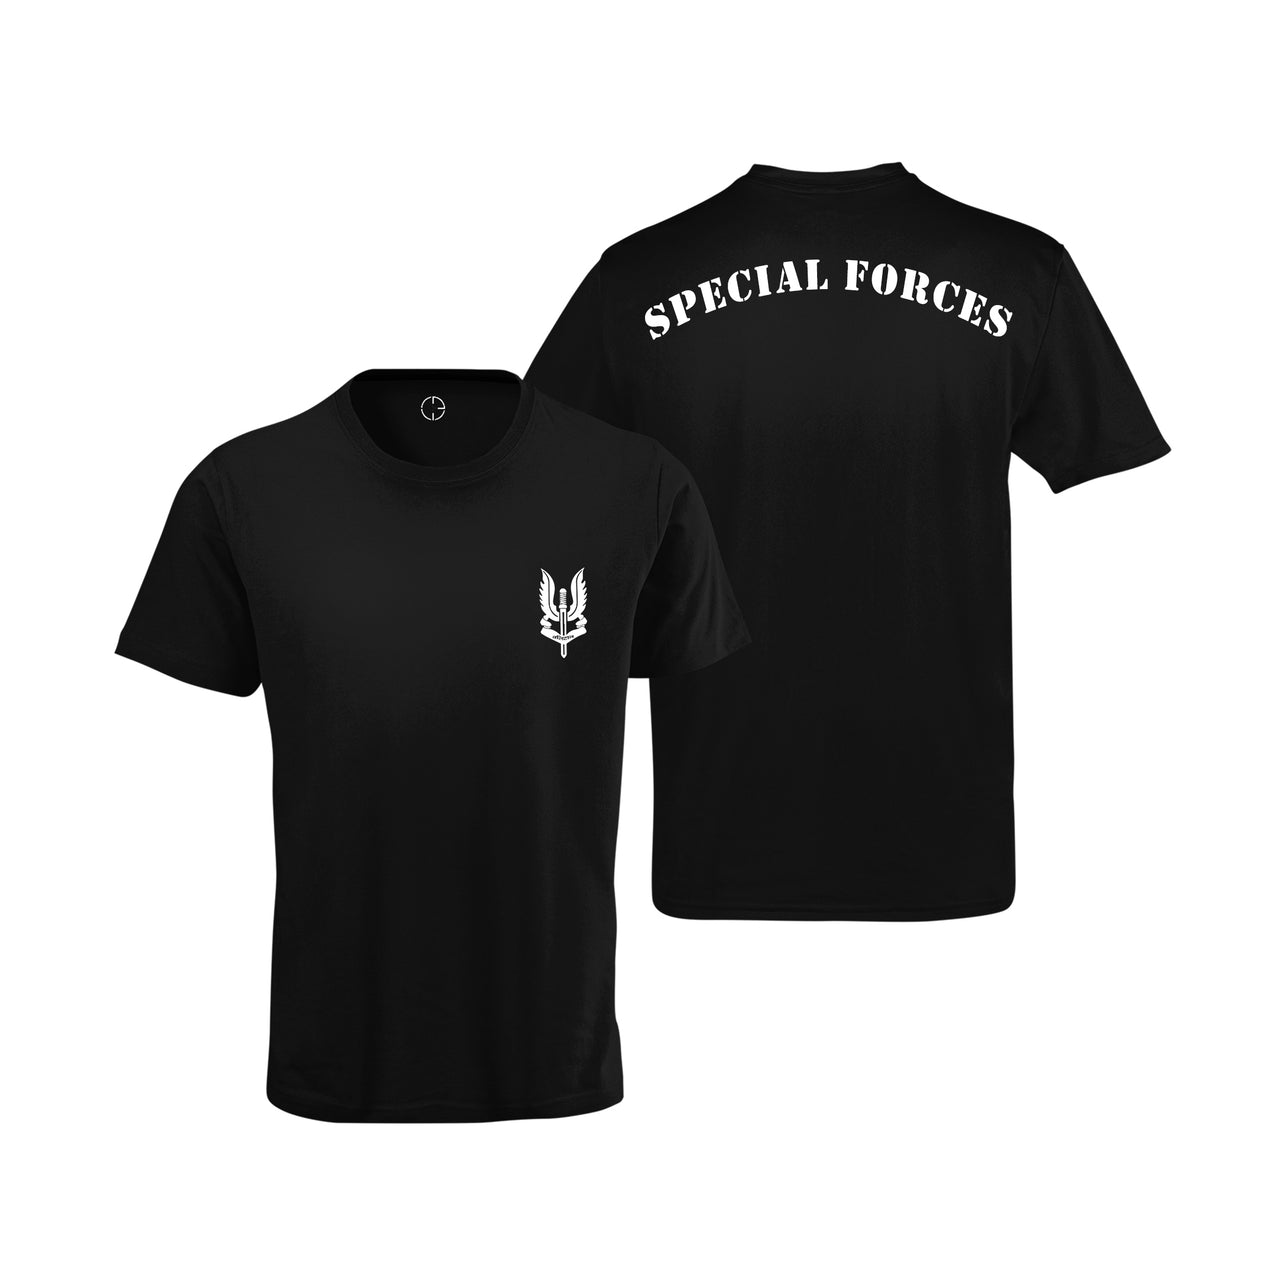 Military T-Shirt - Special Forces (Men)